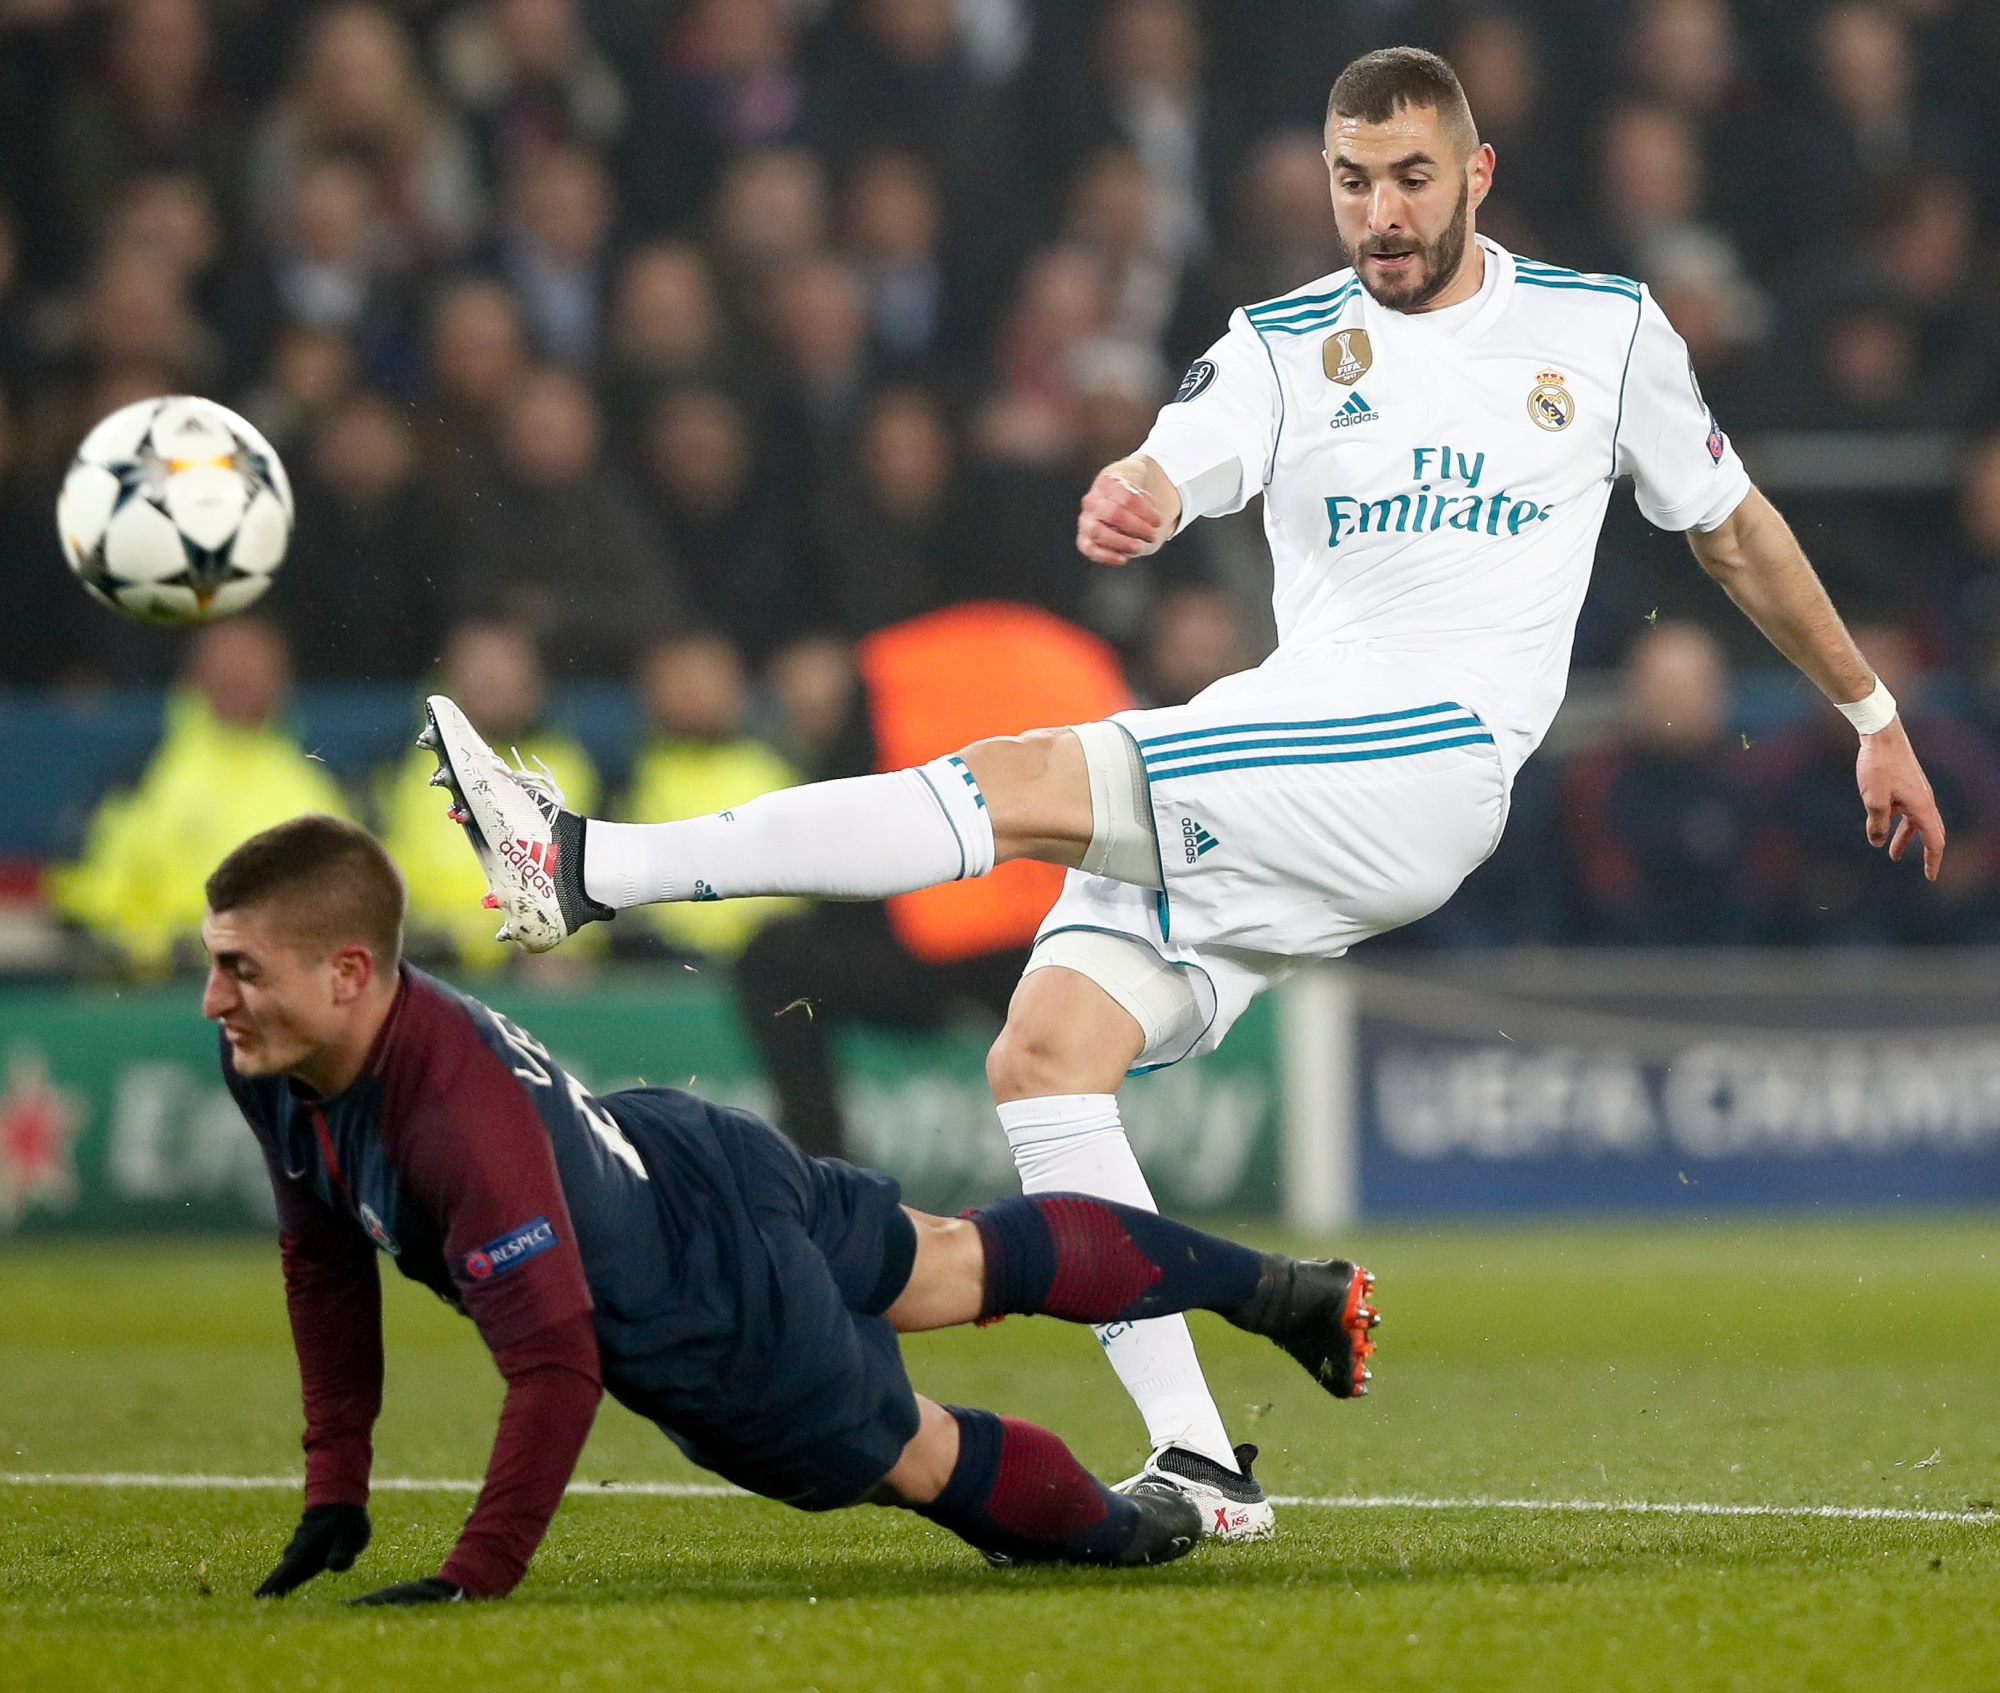 epa06585485 Real Madrid's Karim Benzema (R) in action against Paris Saint Germain's Marco Verratti during the UEFA Champions League round of 16, second leg soccer match between Paris Saint-Germain (PSG) and Real Madrid at the Parc des Princes Stadium in Paris, France, 06 March 2018.  EPA/IAN LANGSDON FRANCE SOCCER UEFA CHAMPIONS LEAGUE